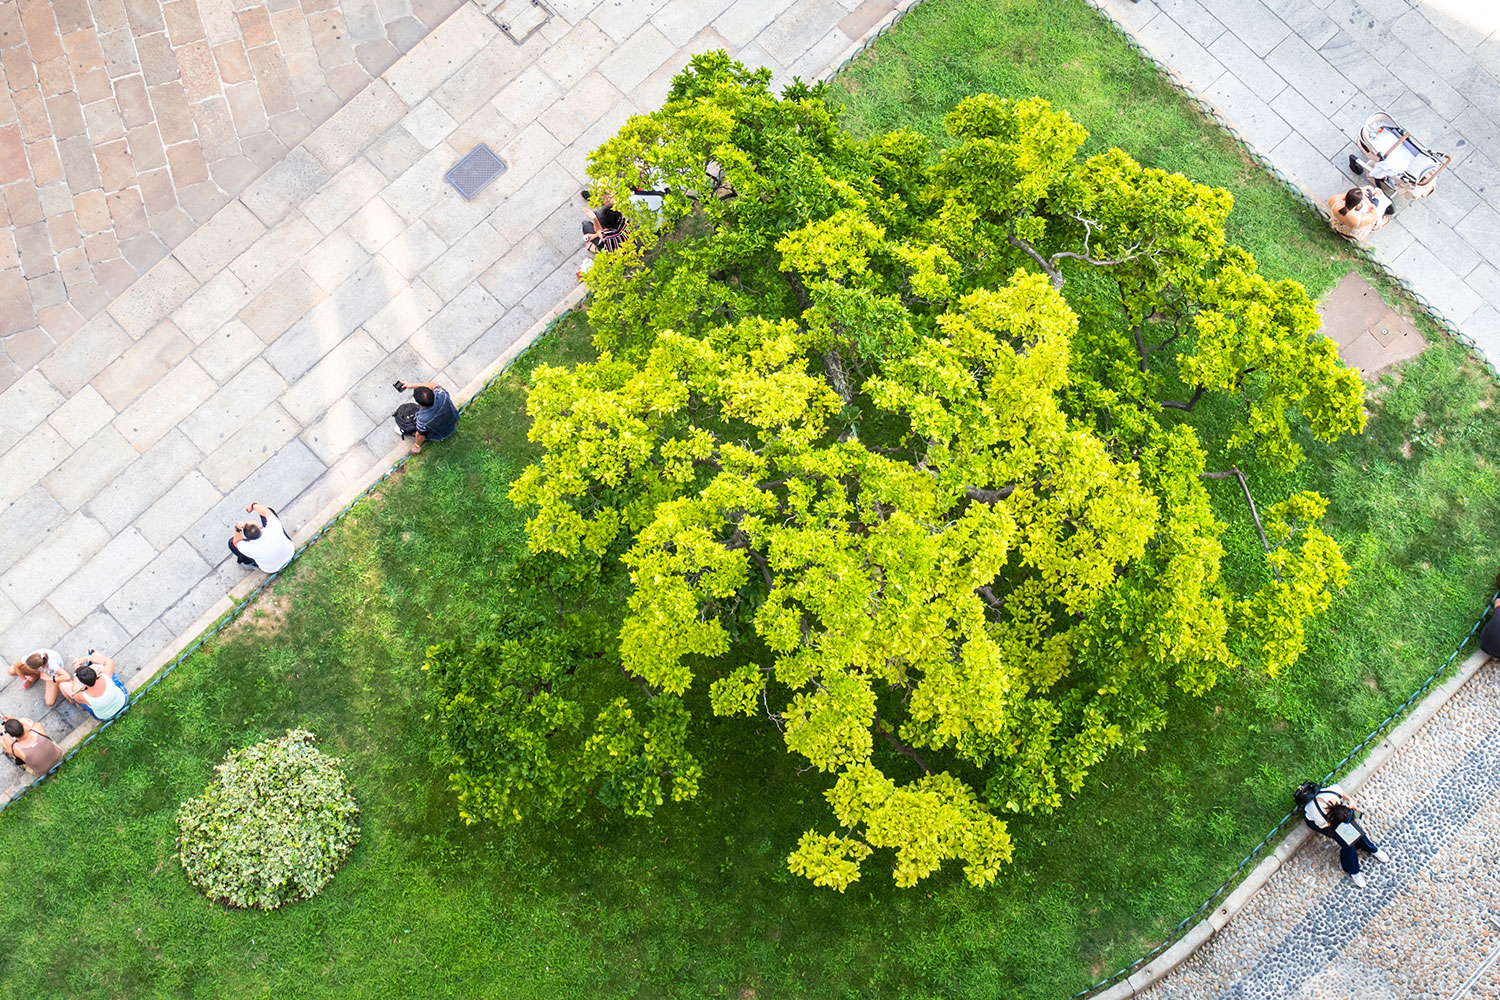 A birds eye view of trees and green space